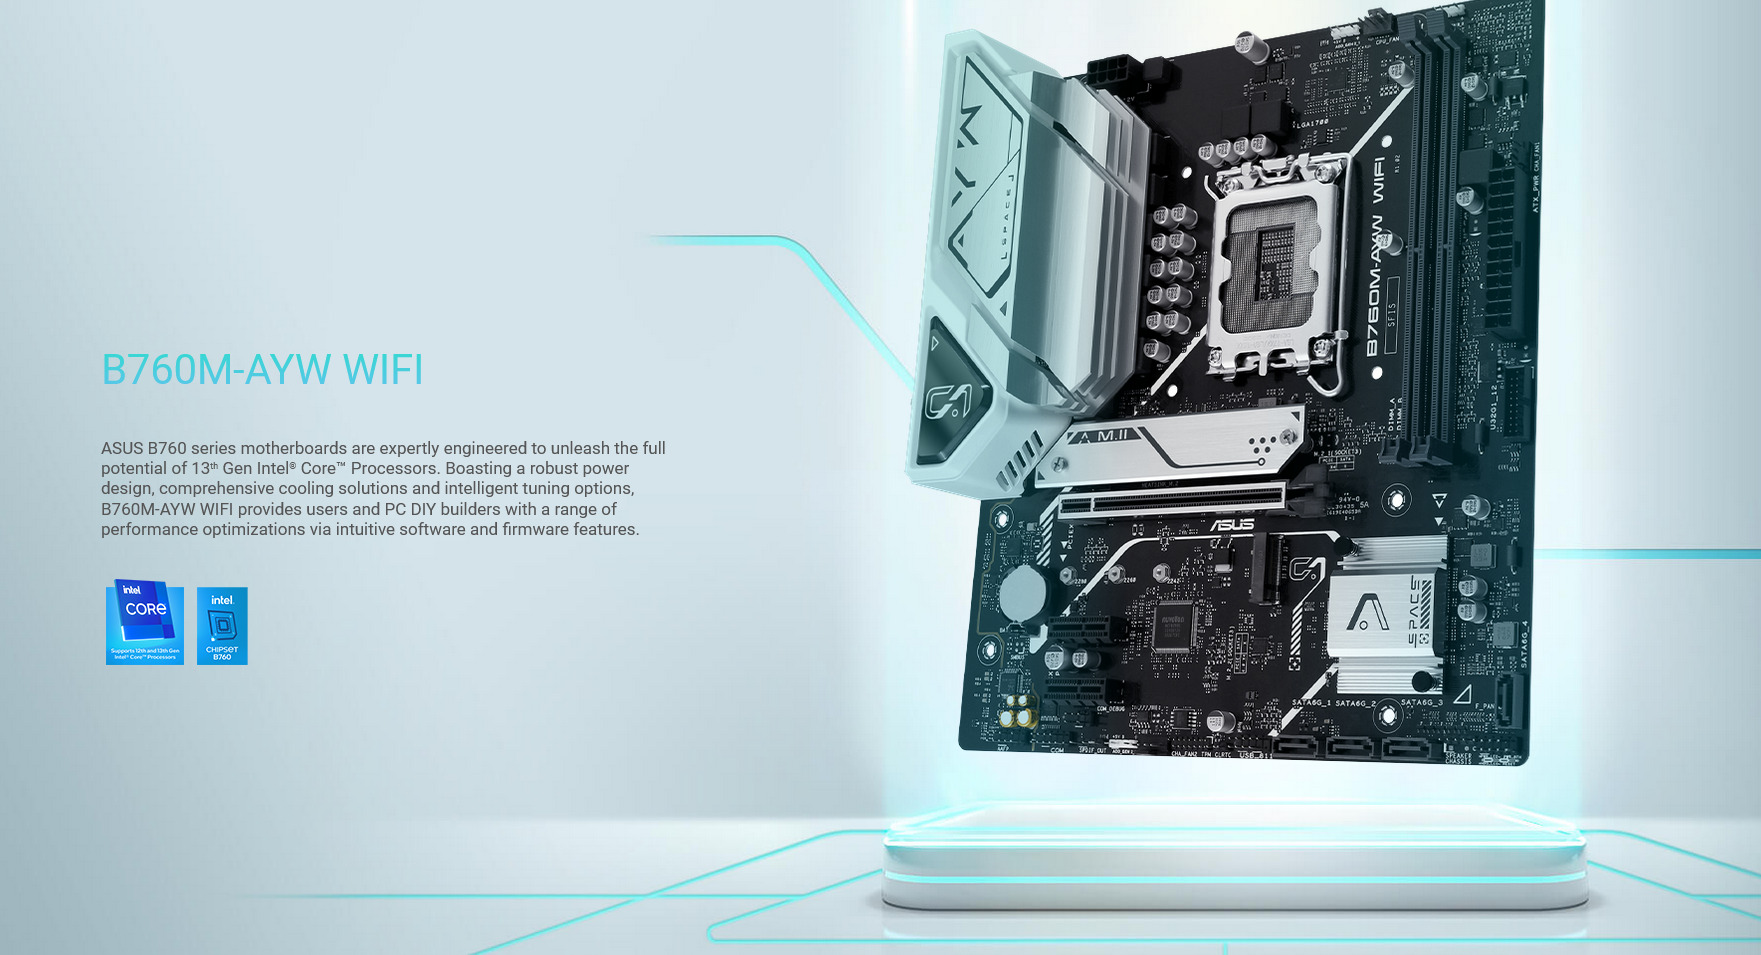 A large marketing image providing additional information about the product ASUS B760M AYW WiFi LGA1700 mATX Desktop Motherboard - Additional alt info not provided